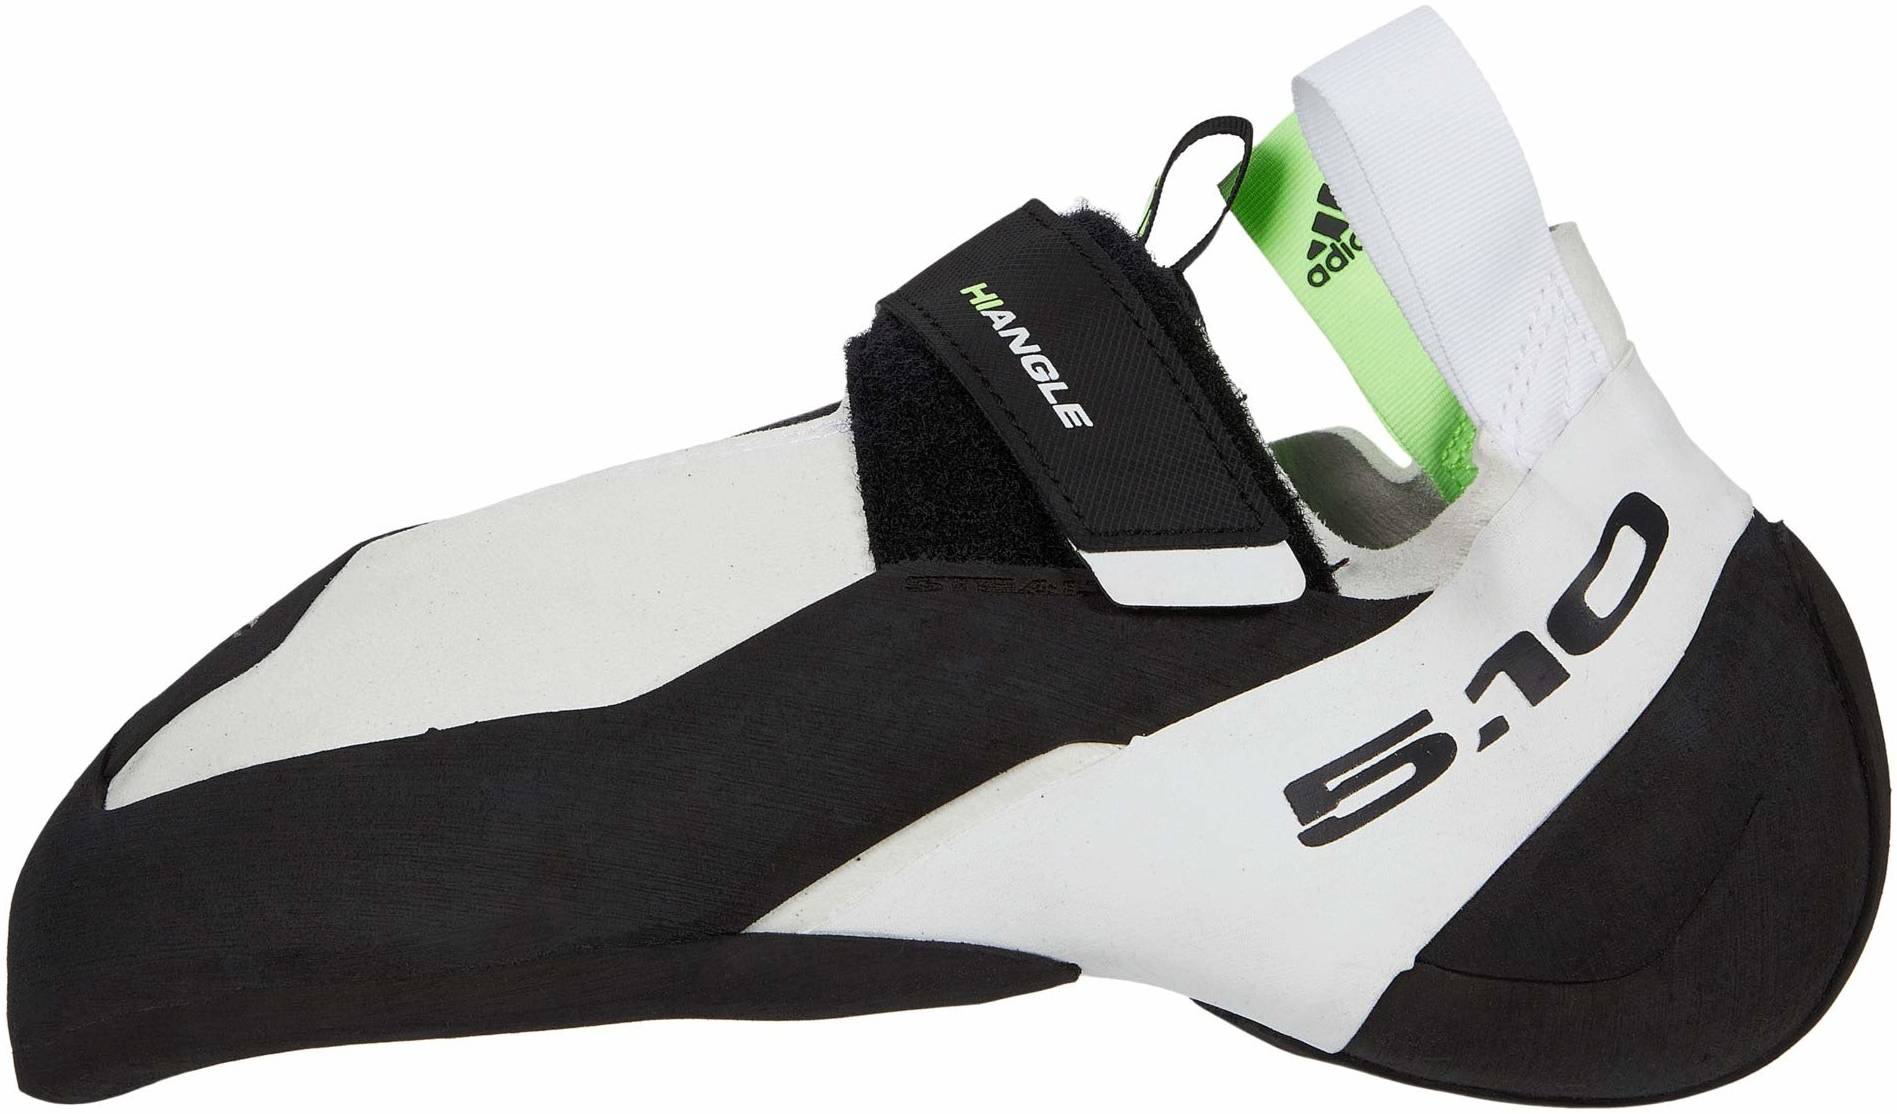 Save 56% on Five Ten Climbing Shoes (20 